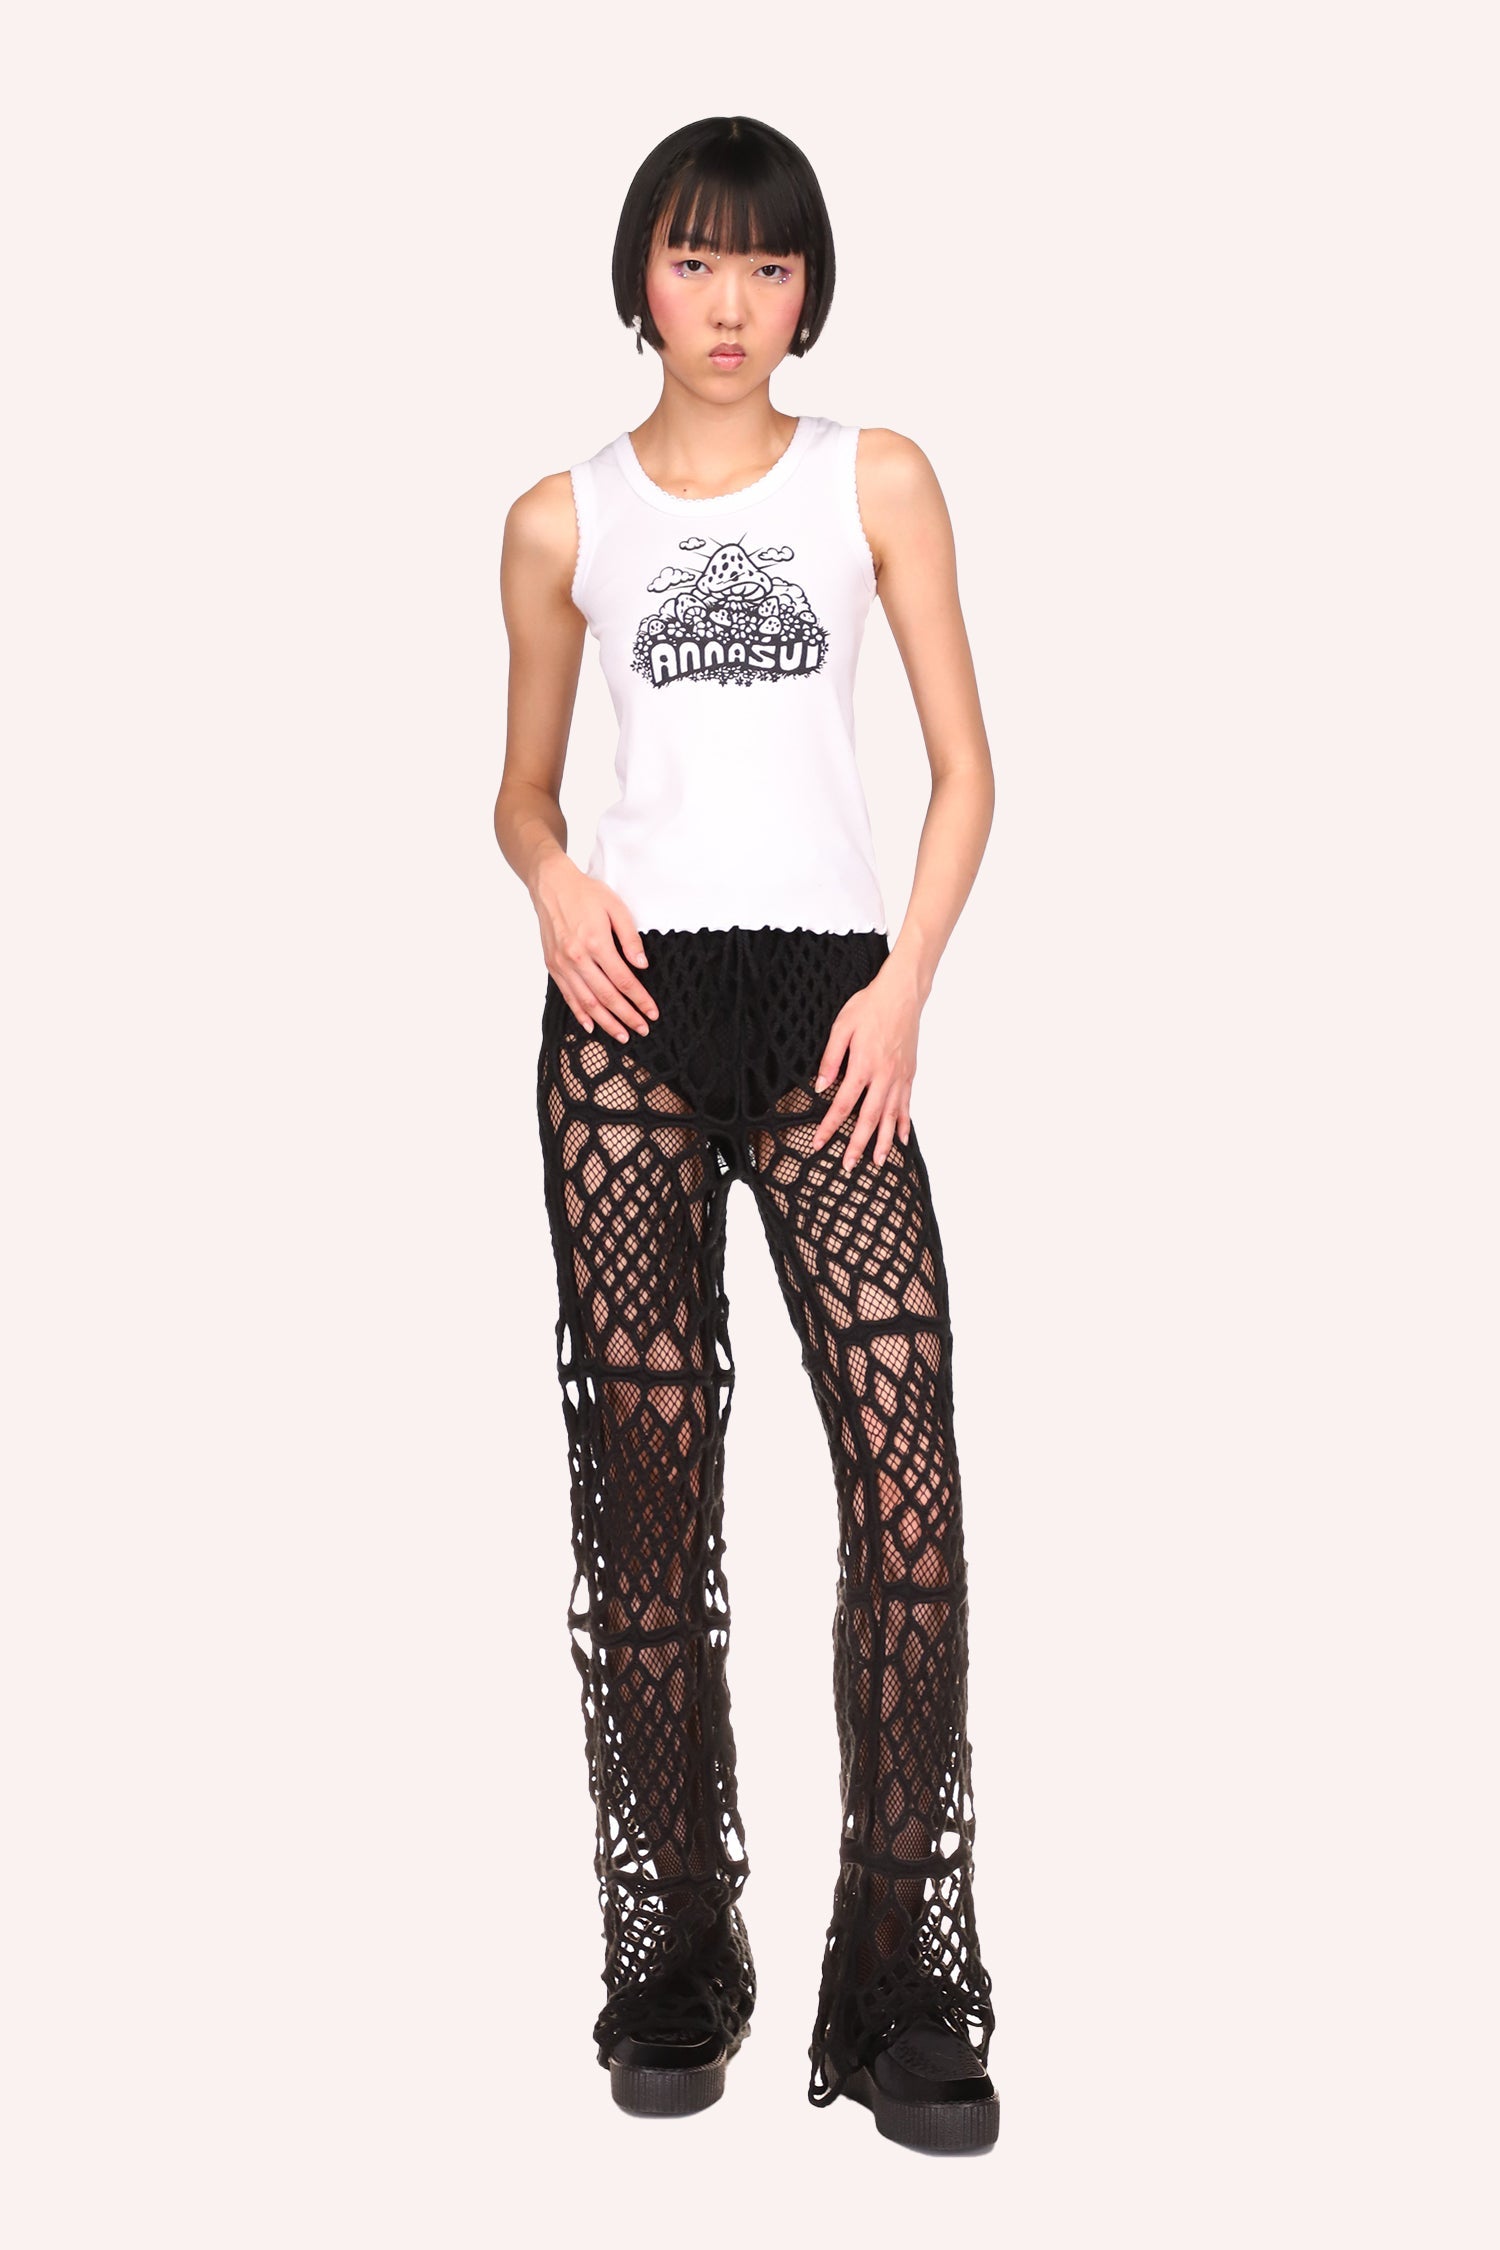 Hand-Crochet Diamond Pants Black can be worn with any of the Anna Sui tops